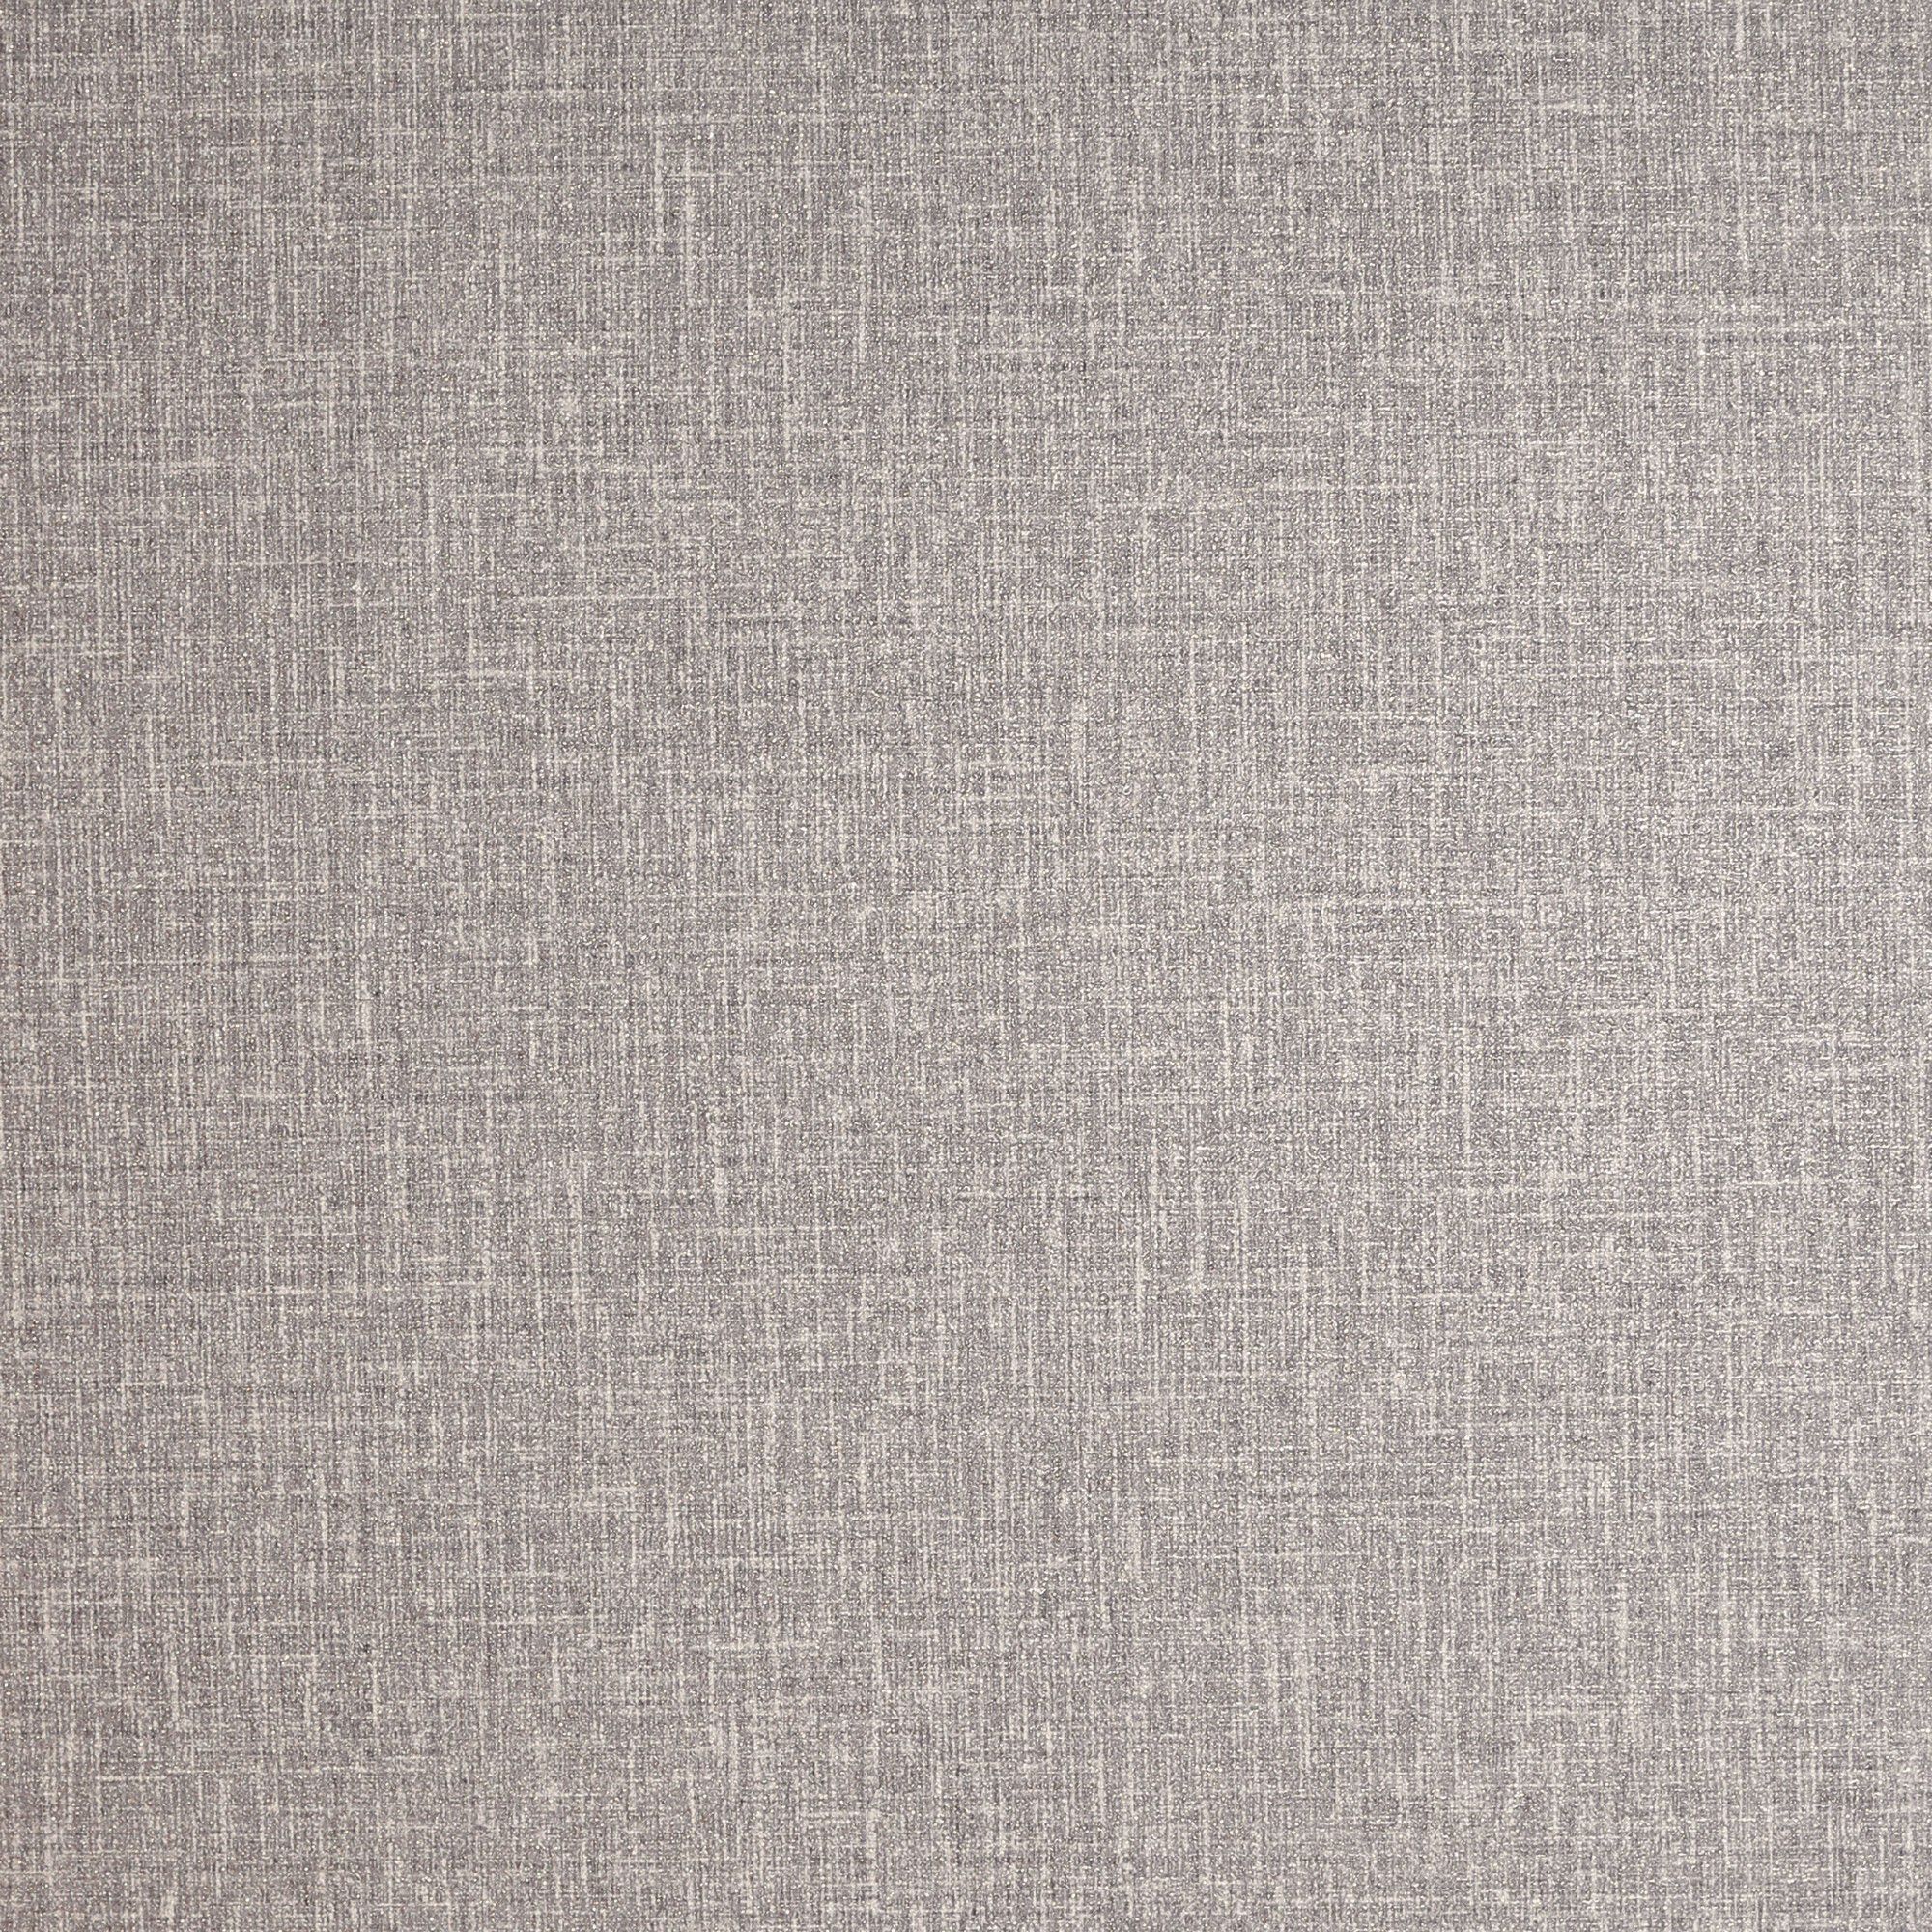 Image of Arthouse Luxe Hessian Mink Wallpaper - 10.05m x 53cm